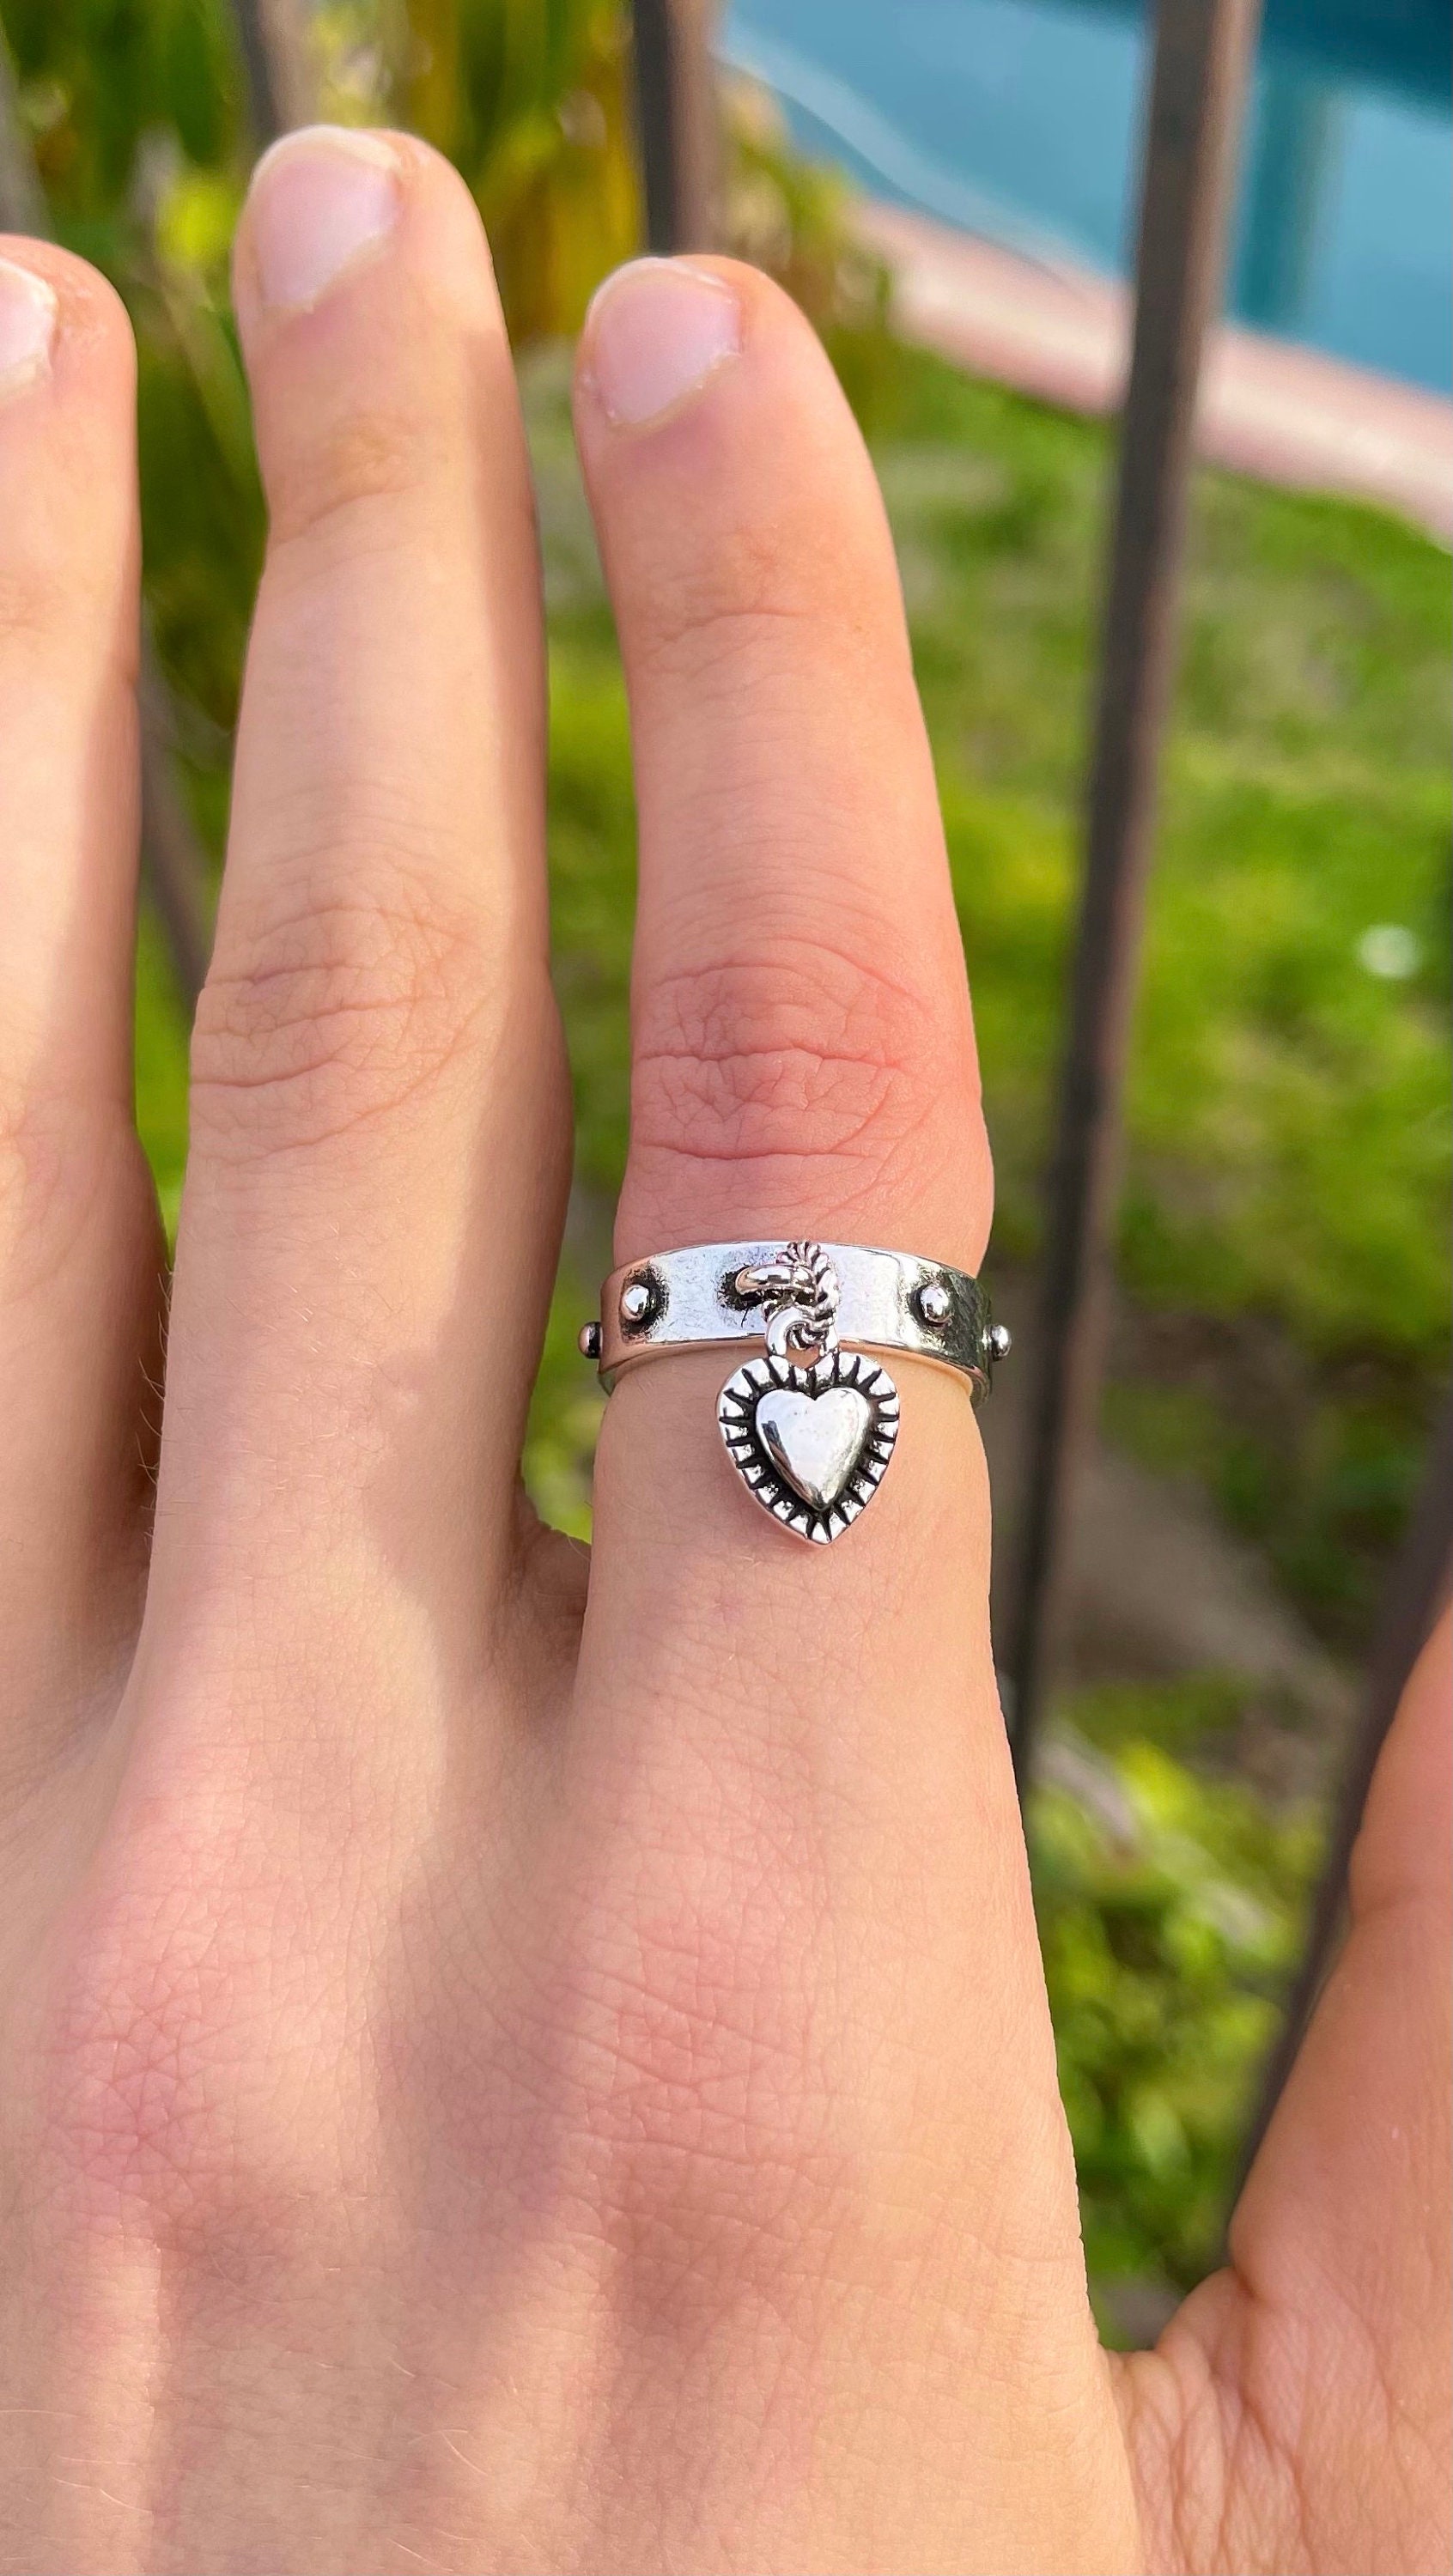 Gucci Heart Ring - Etsy